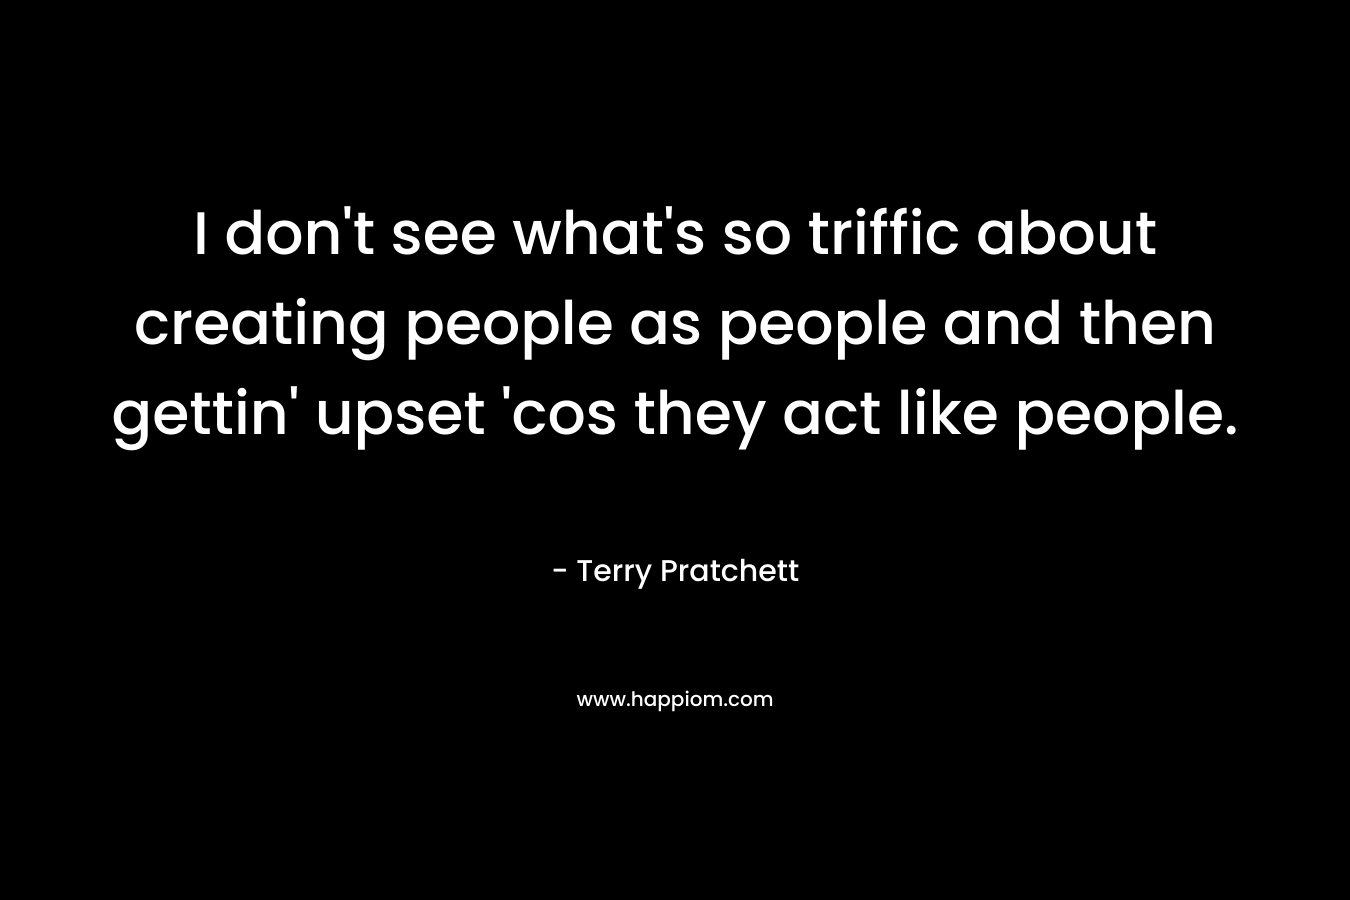 I don’t see what’s so triffic about creating people as people and then gettin’ upset ‘cos they act like people. – Terry Pratchett